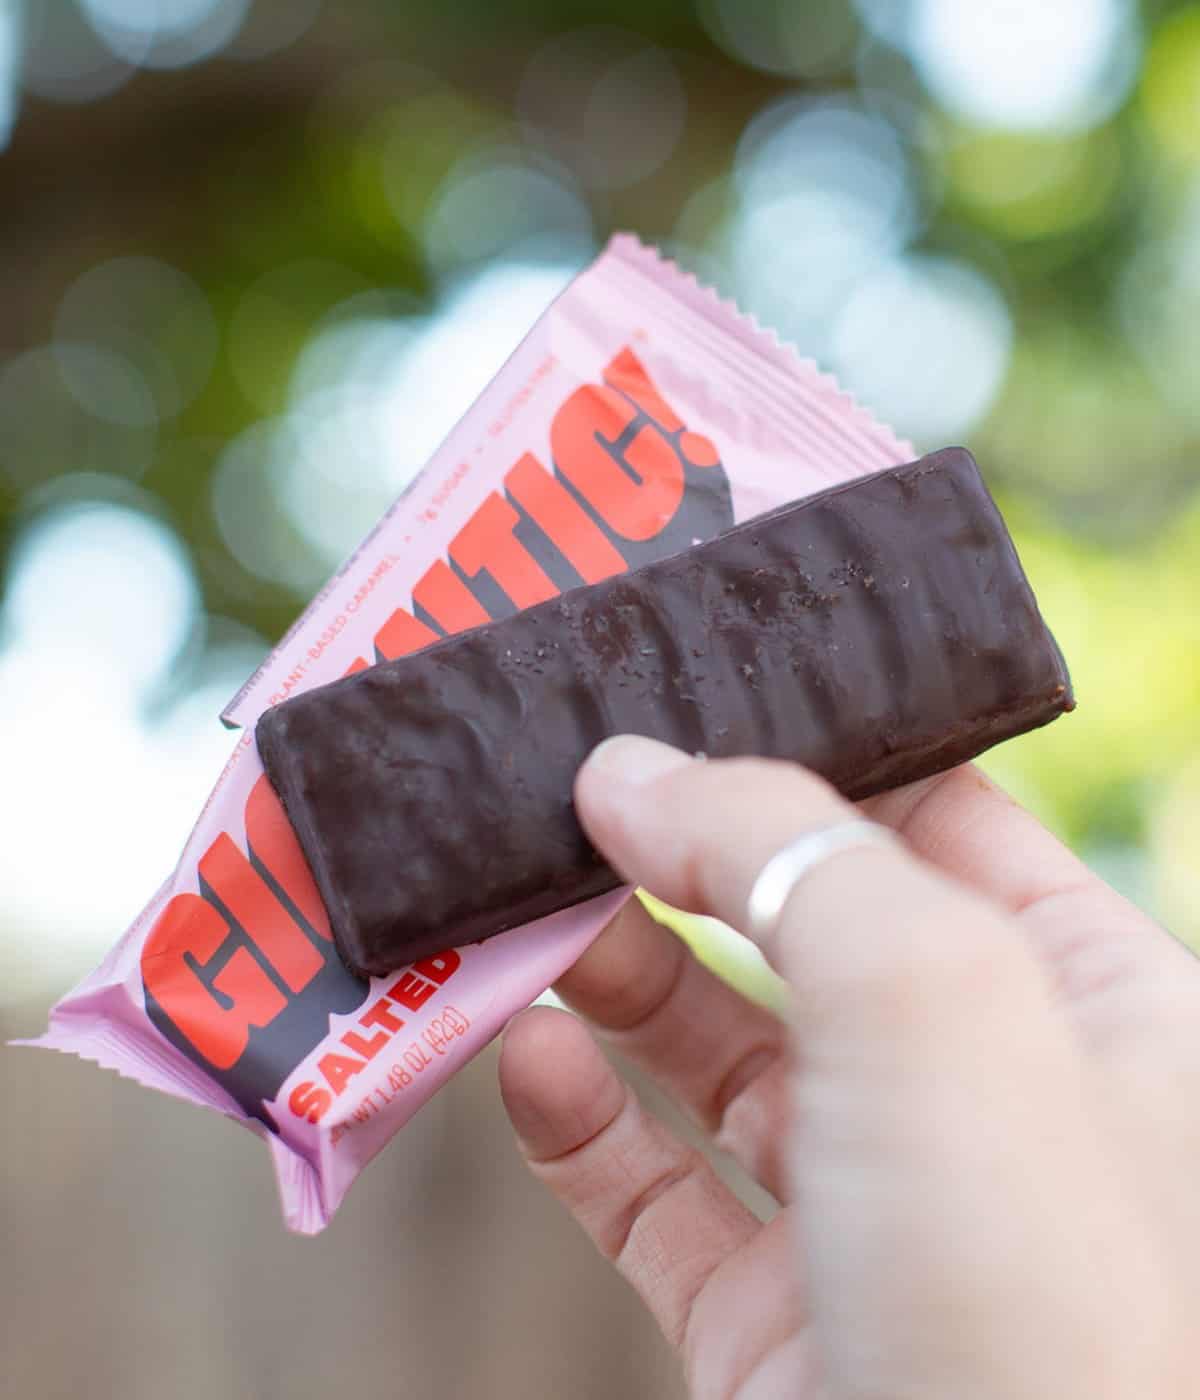 Holding out a plant-based chocolate covered candy bar from Gigantic. 